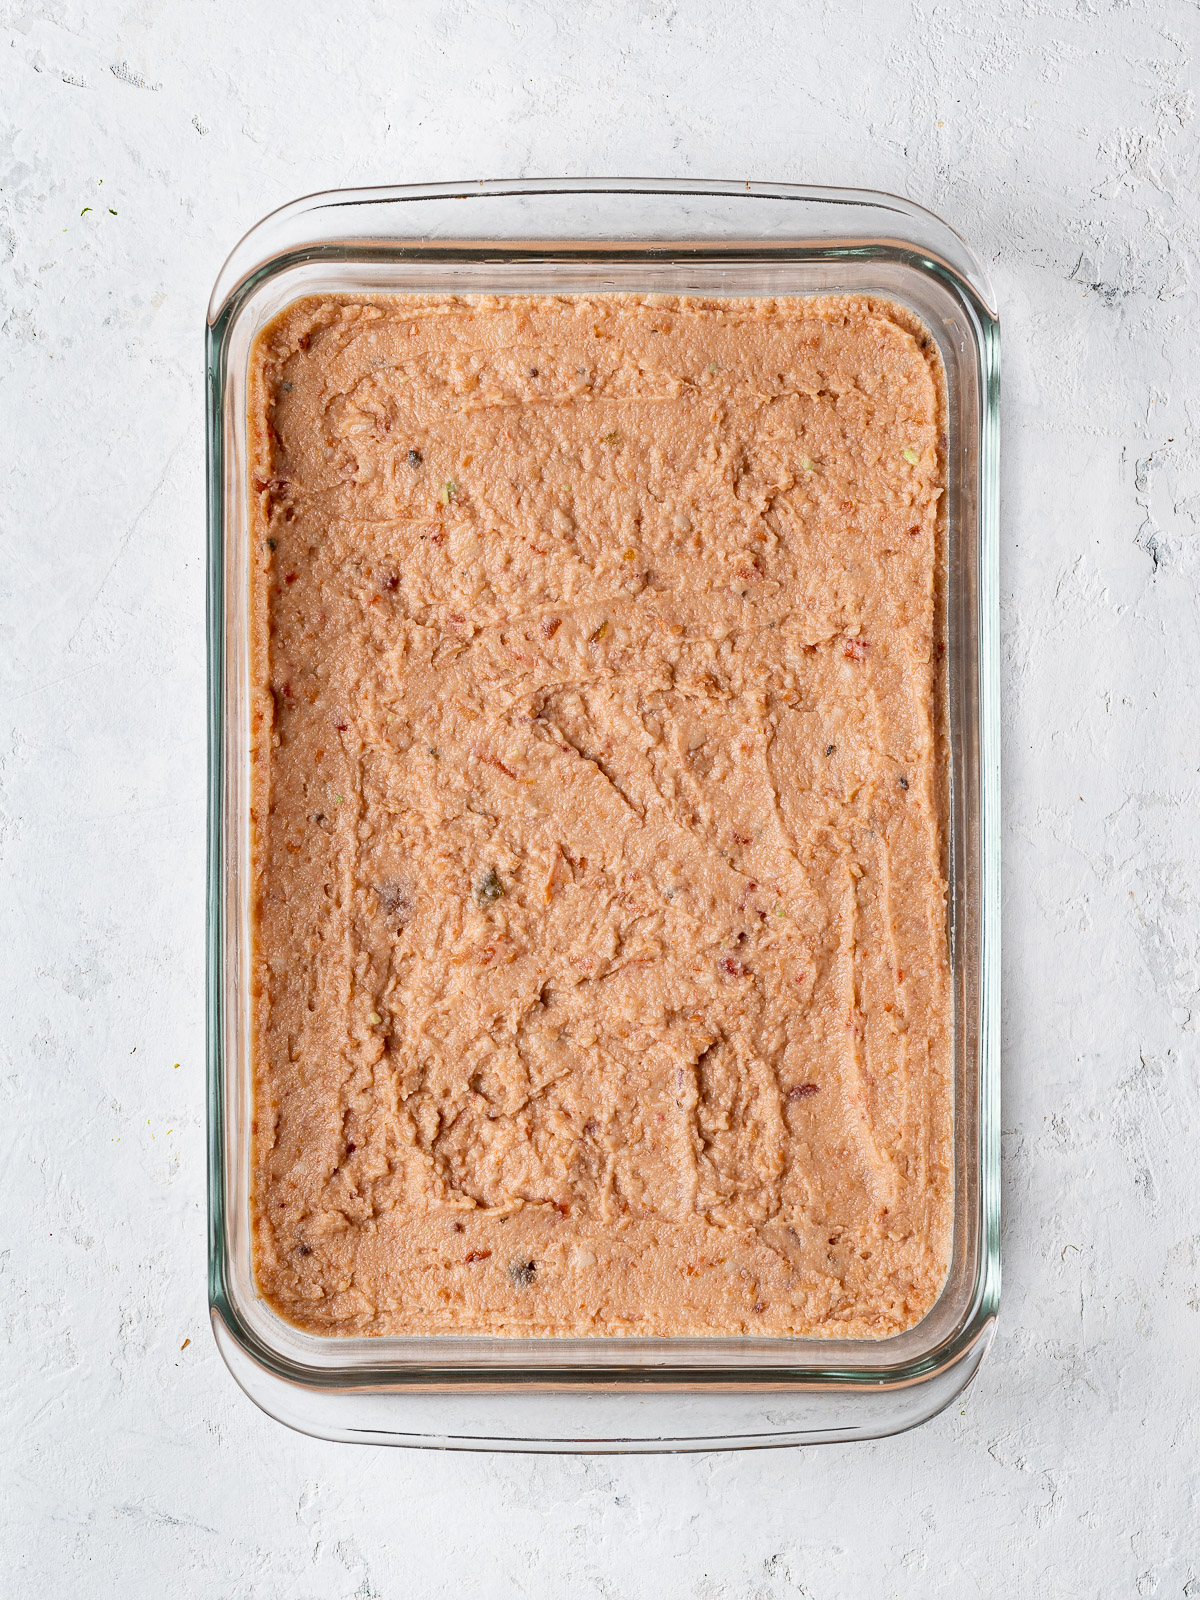 refried beans spread on bottom of glass dish